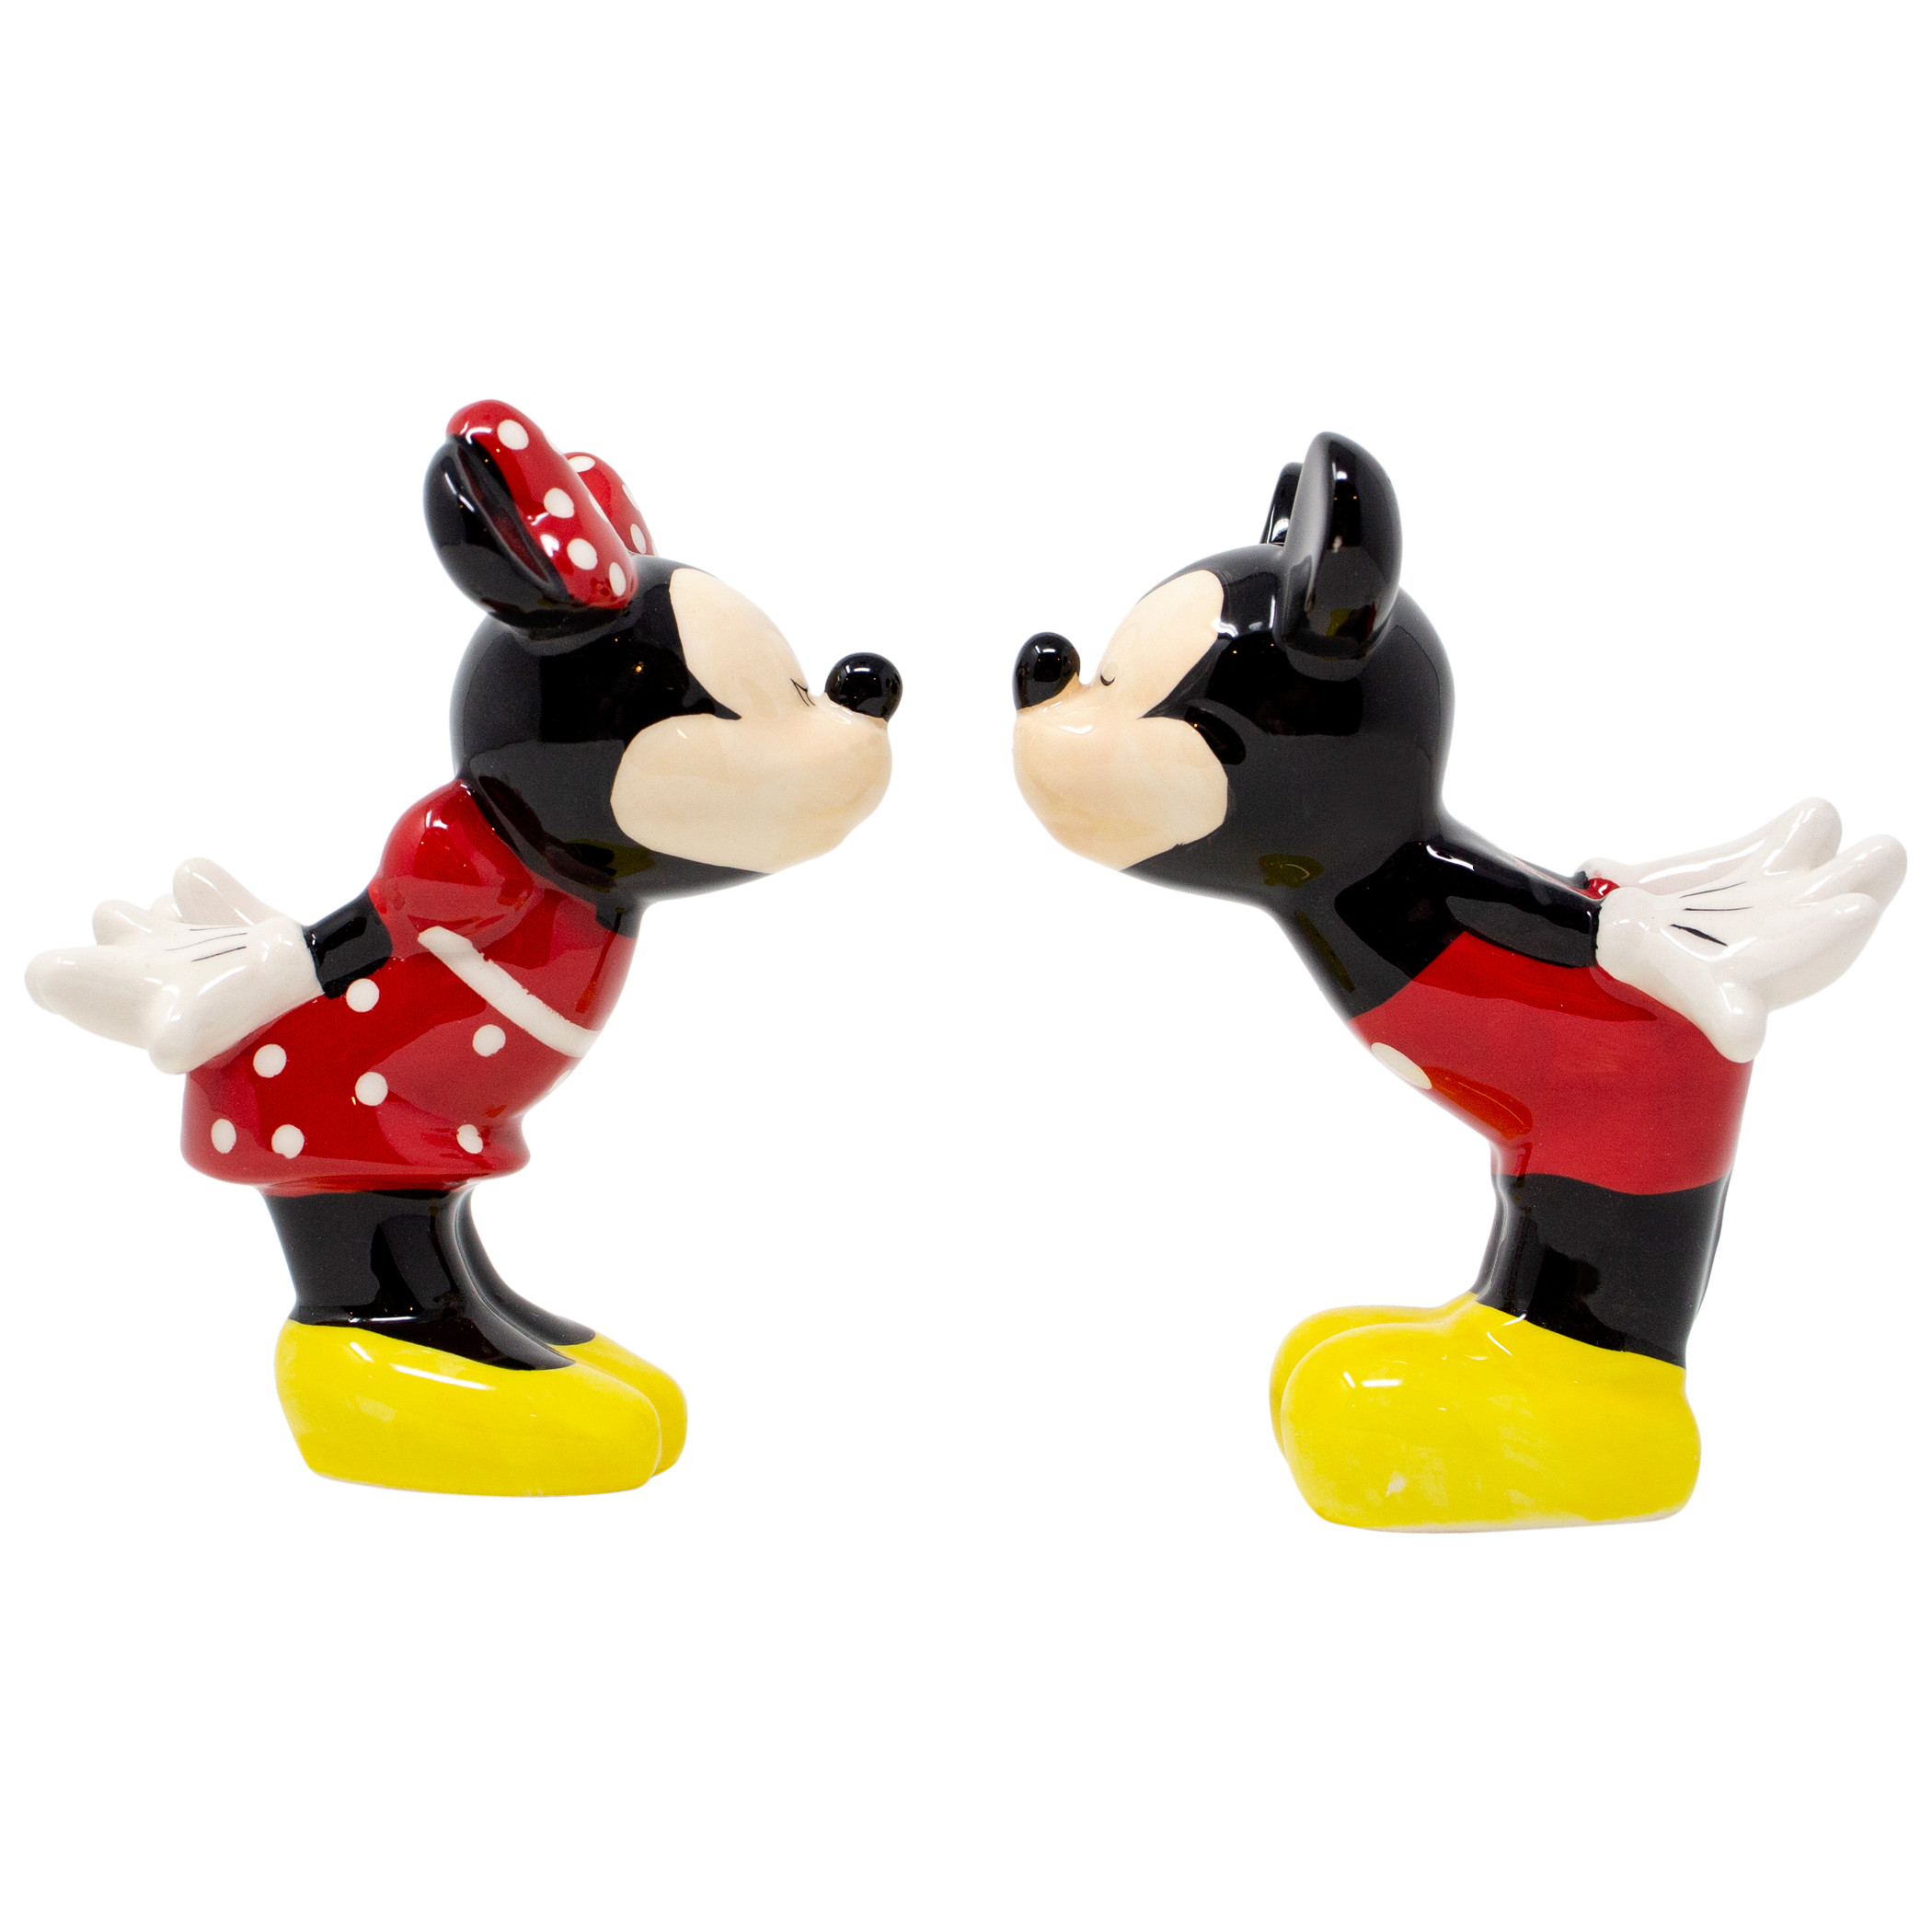 Disney Mickey and Minnie Kissing Salt and Pepper Shakers